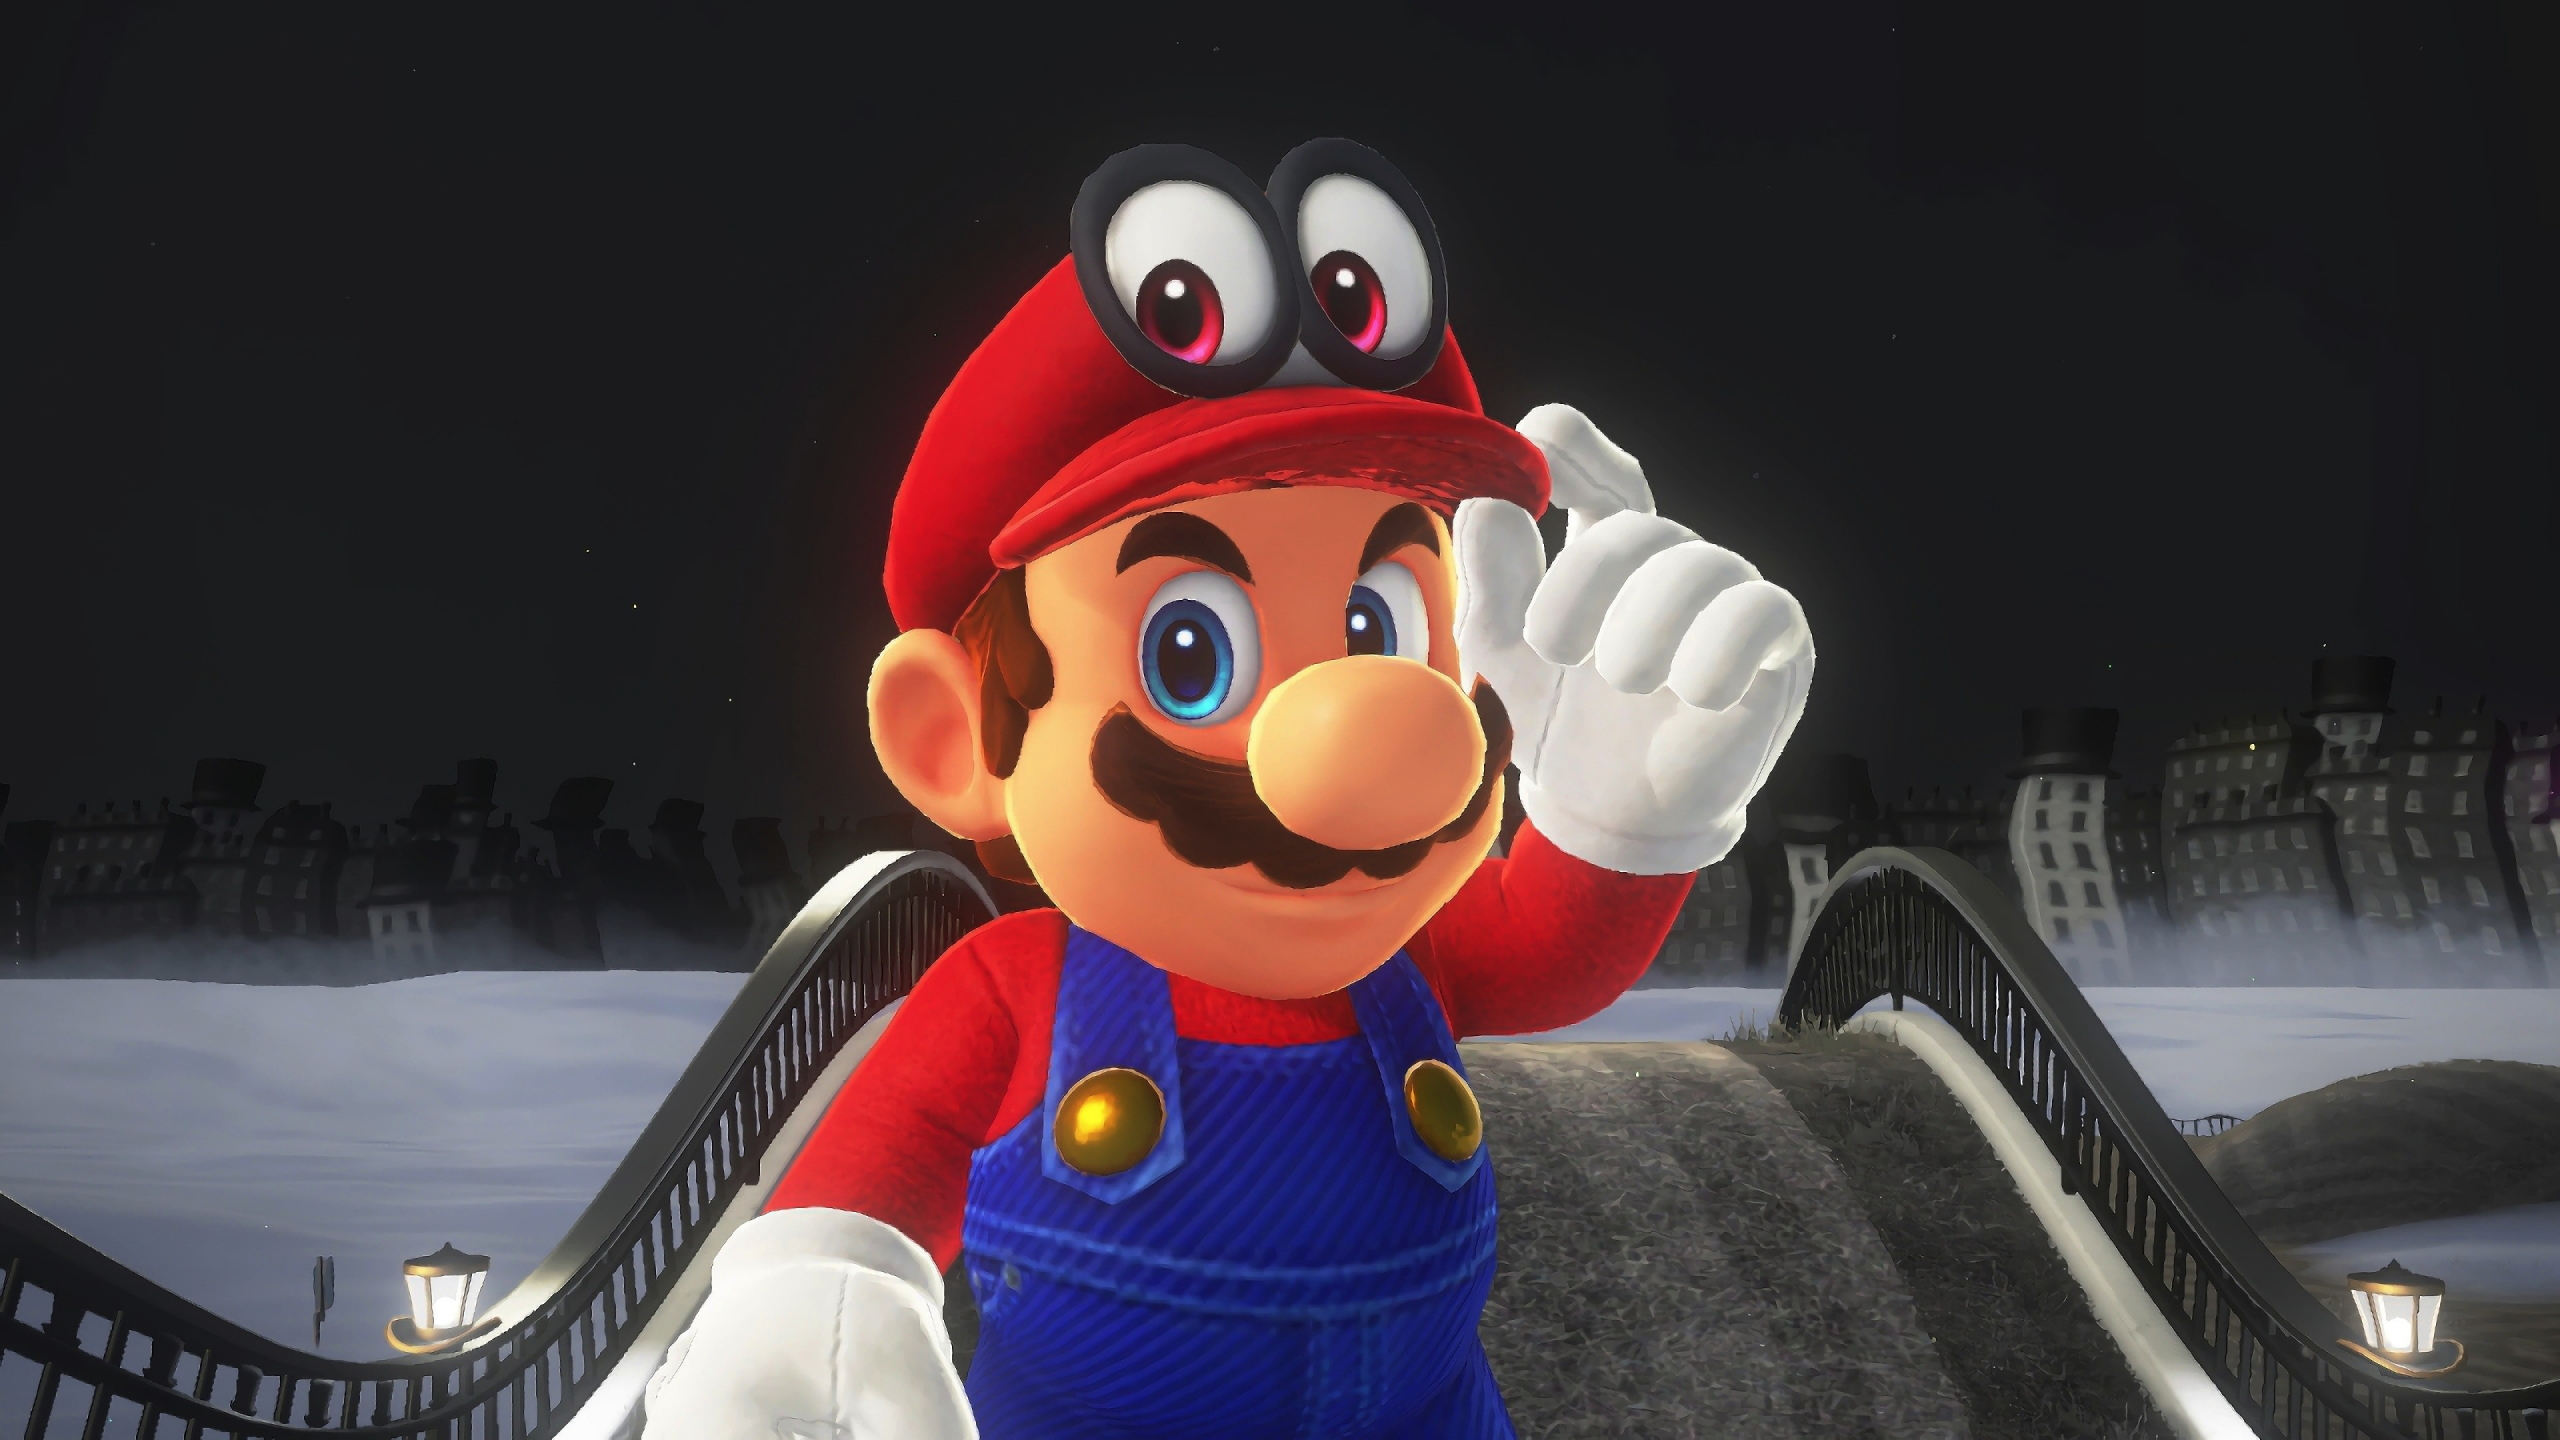 how to play super mario odyssey on pc with emulator